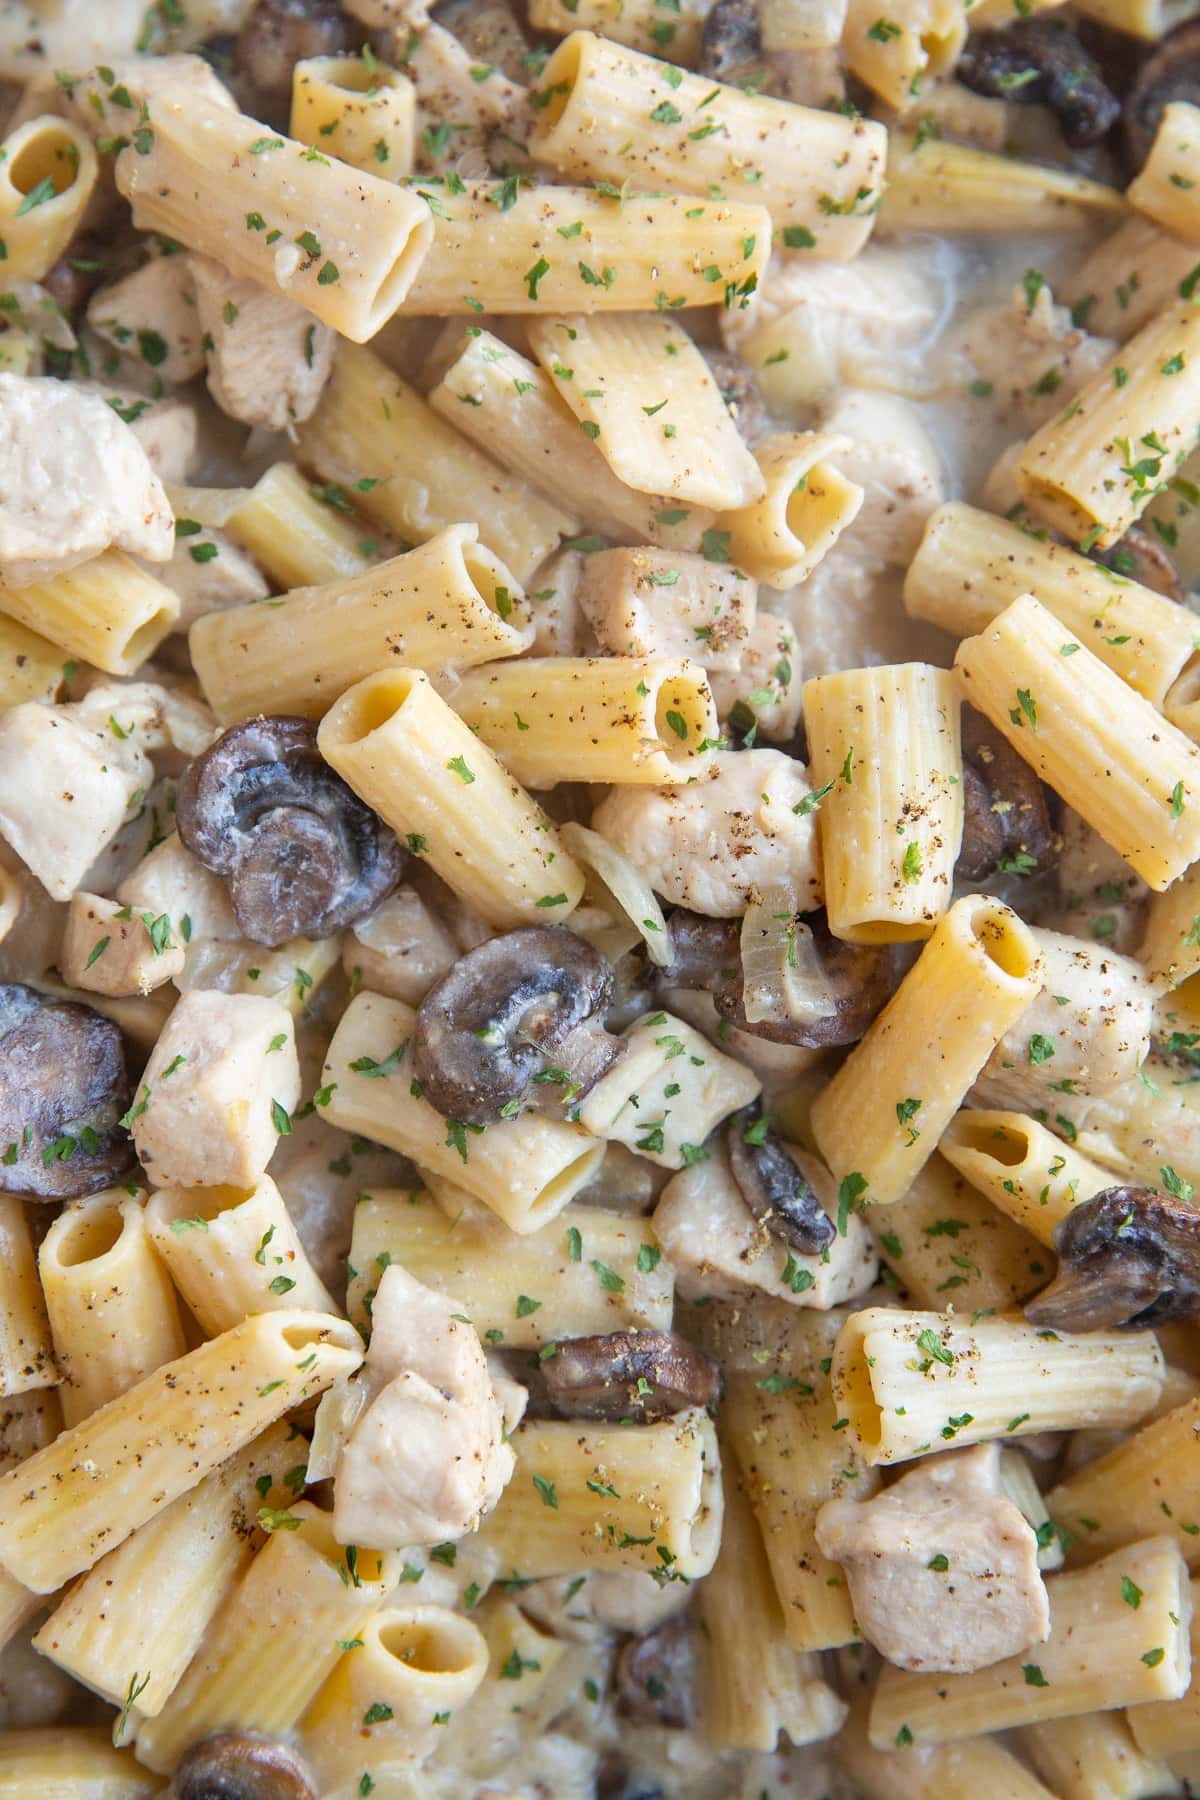 Close up image of chicken stroganoff so you can see the noodles, mushrooms, chicken and creamy sauce.